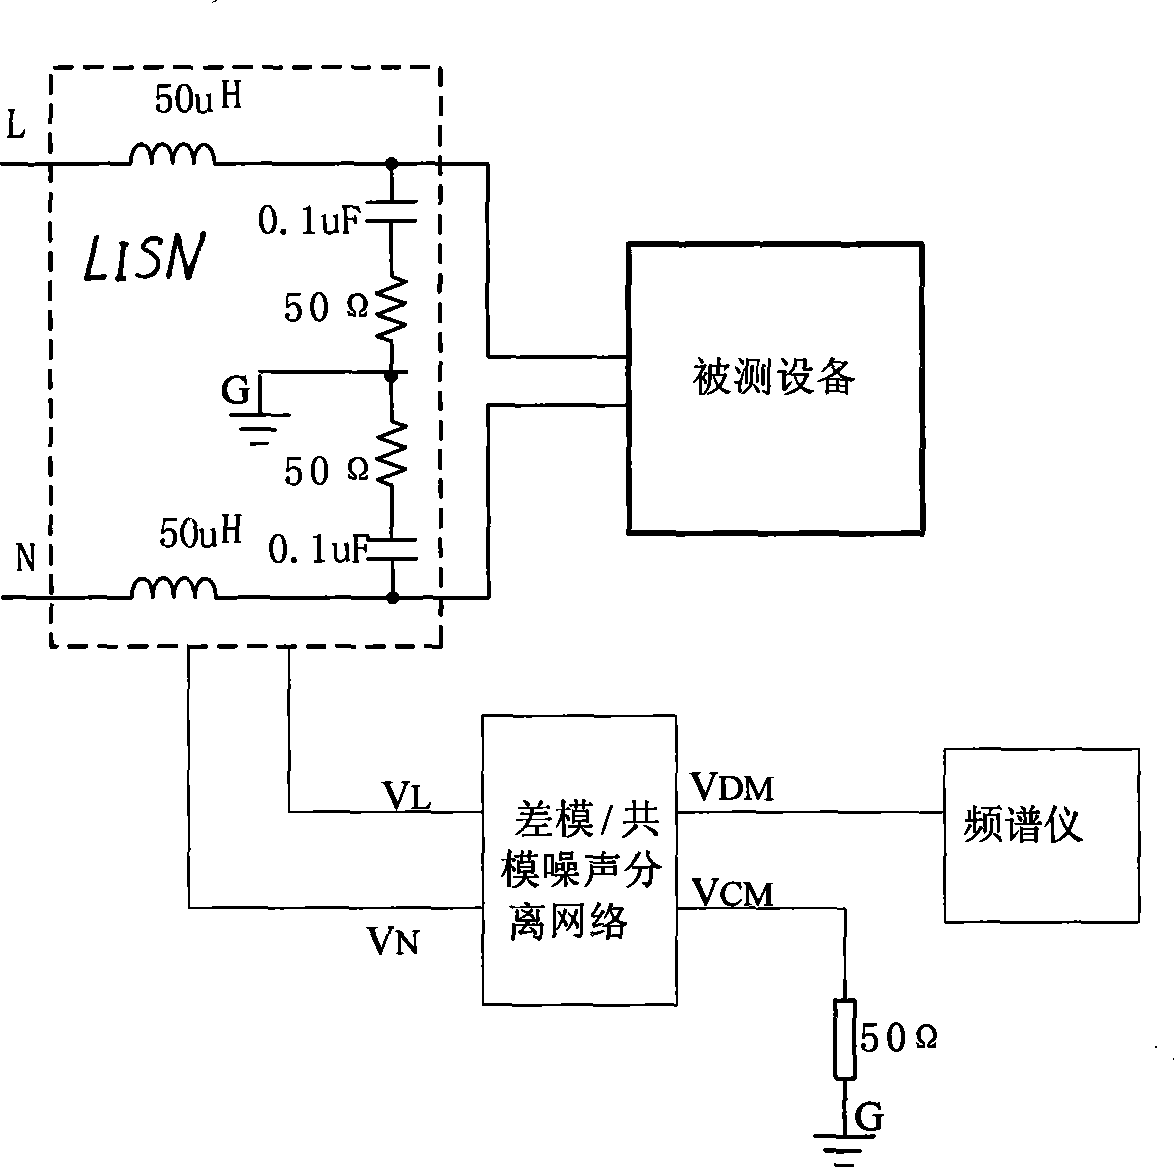 Common mode noise and differential mode noise separator for conductive electromagnetic interference noise